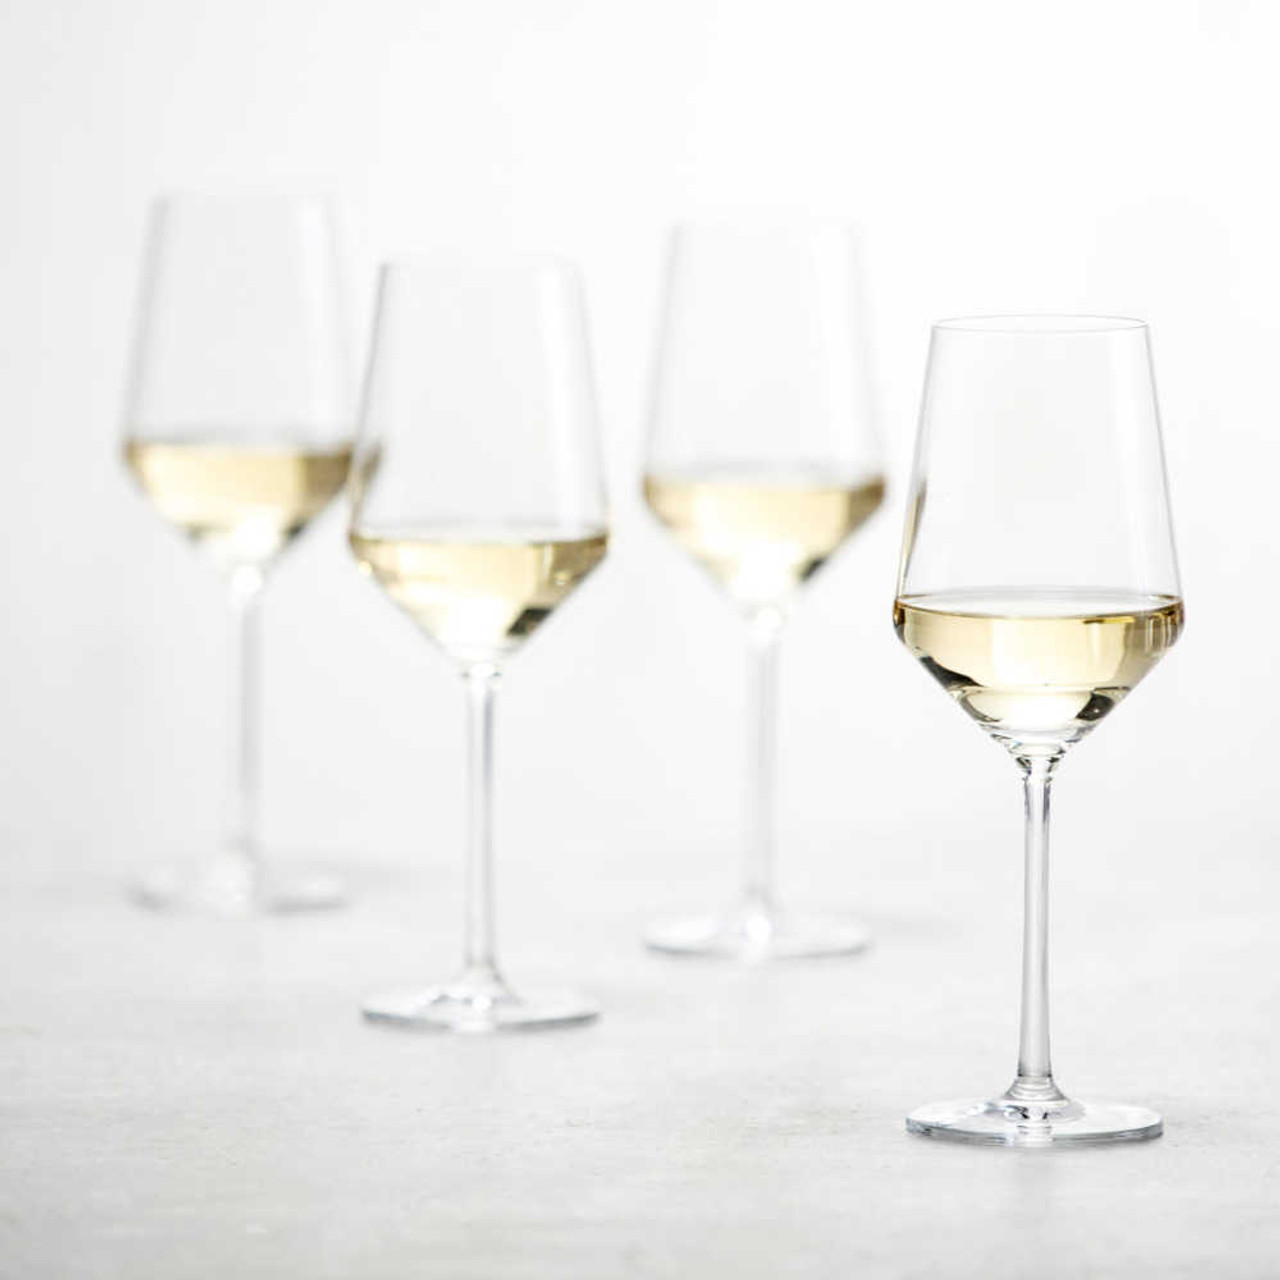 https://cdn11.bigcommerce.com/s-hccytny0od/images/stencil/1280x1280/products/5457/23732/Schott_Zwiesel_Pure_Sauvignon_Blanc_Wine_Glass_1__99433.1684708572.jpg?c=2?imbypass=on